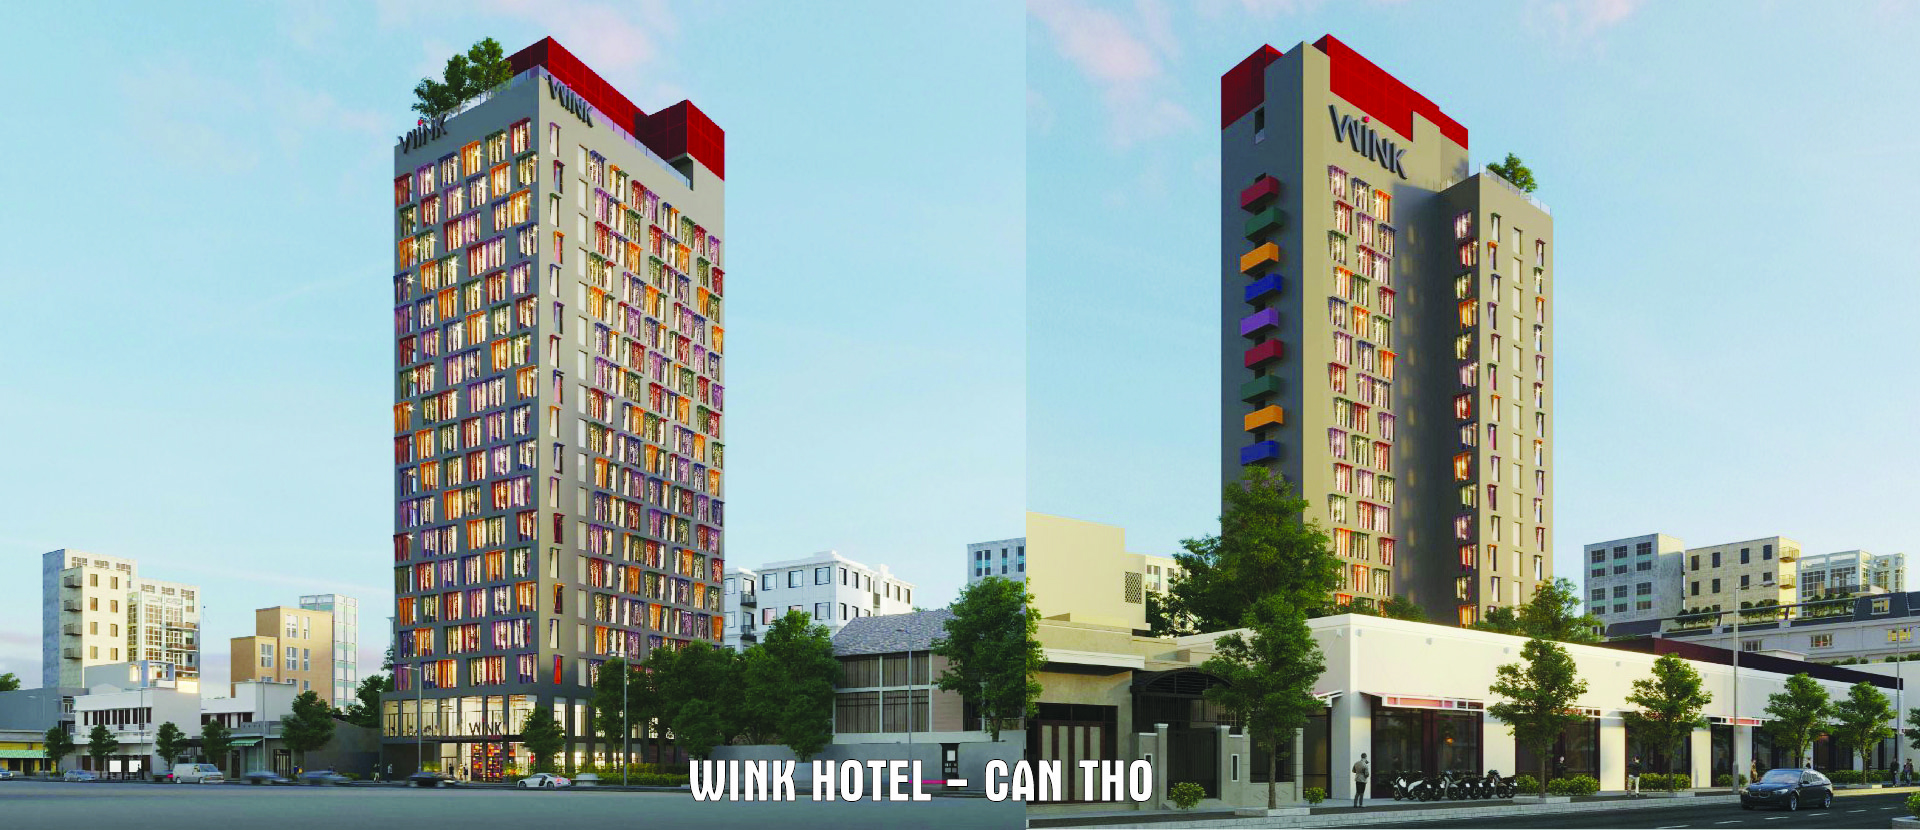 WINK HOTEL - CAN THO